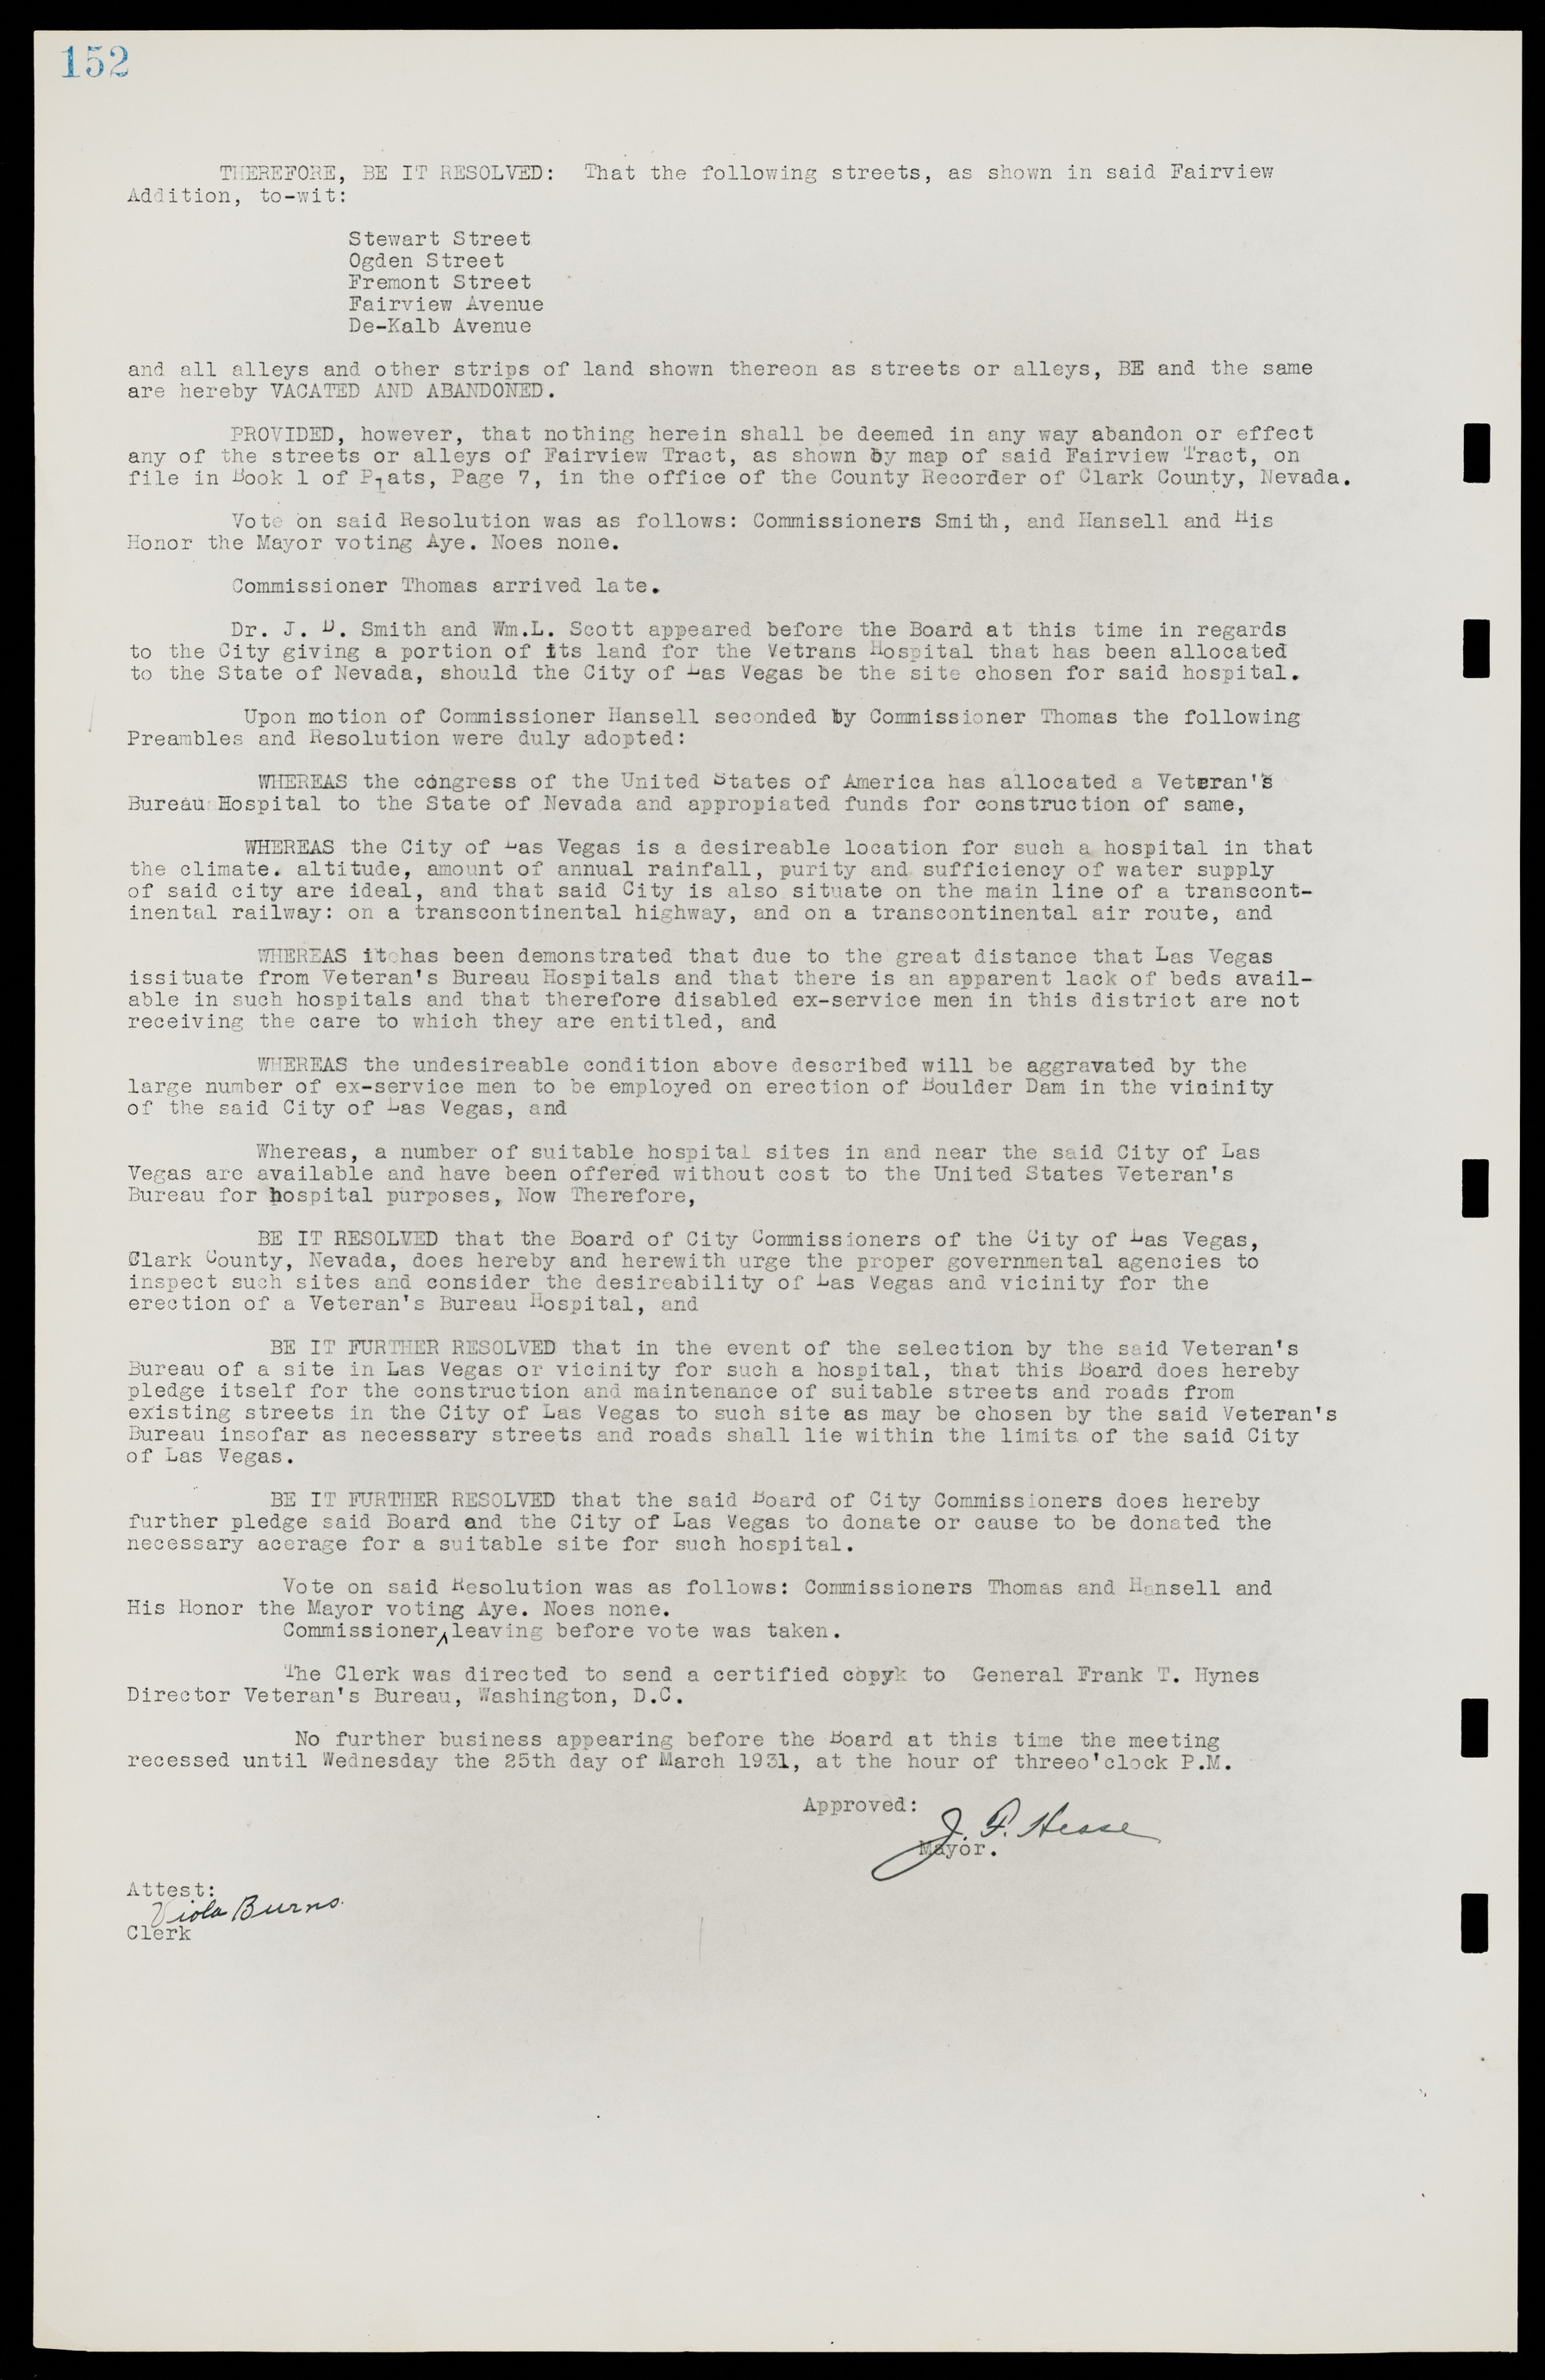 Las Vegas City Commission Minutes, May 14, 1929 to February 11, 1937, lvc000003-158